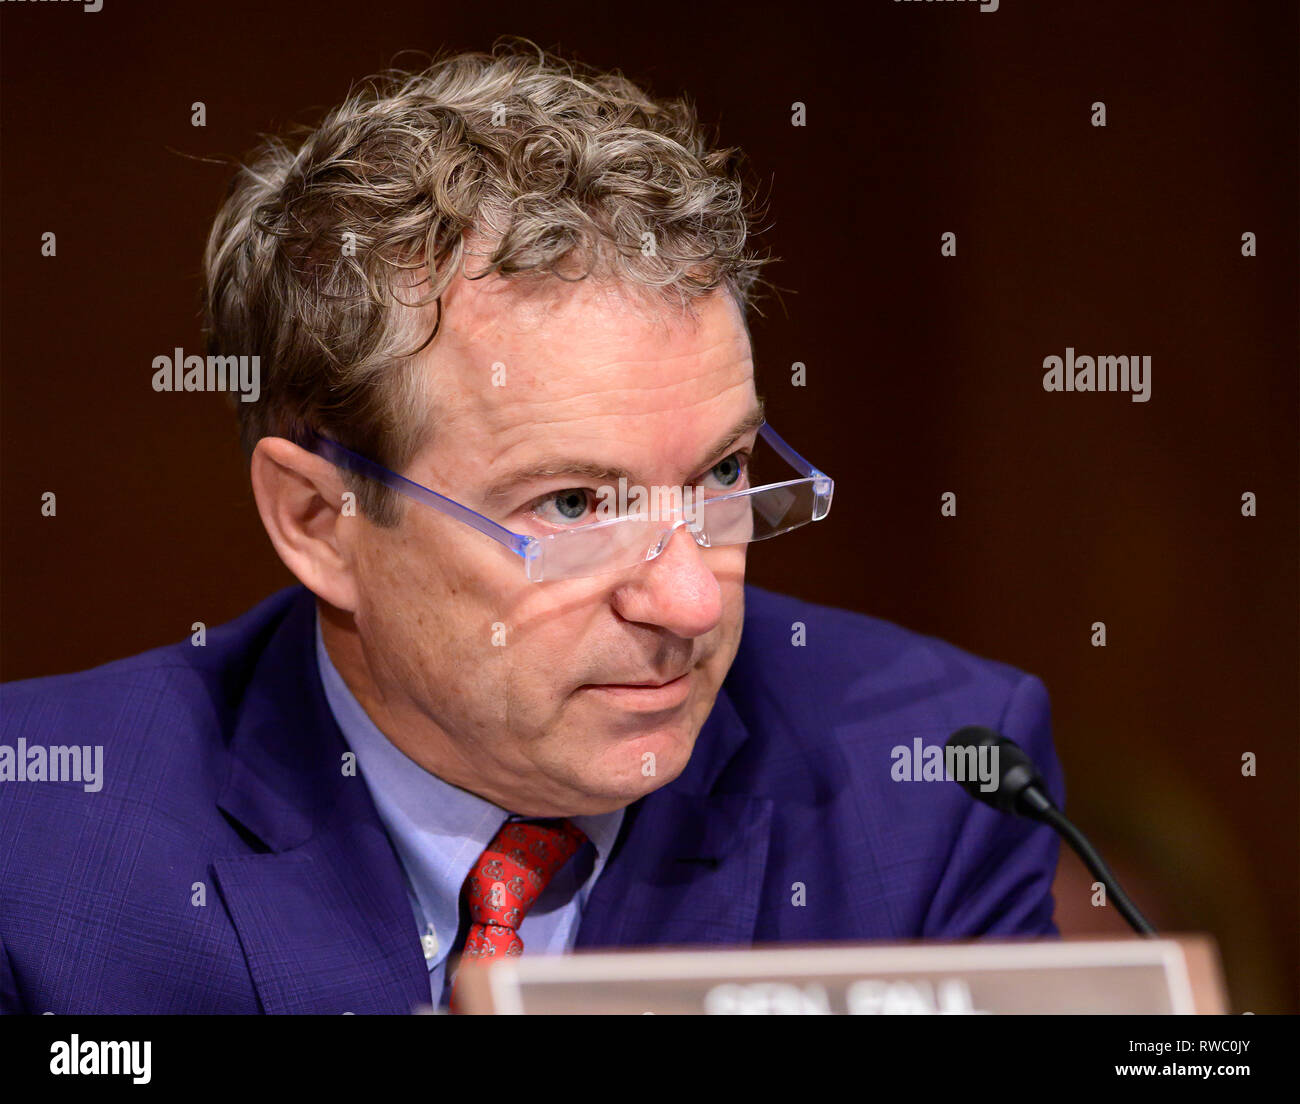 United States Senator Rand Paul (Republican of Kentucky) questions witnesses during the US Senate Committee on Health, Education, Labor and Pensions Committee hearing on 'Vaccines Save Lives: What Is Driving Preventable Disease Outbreaks?' on Capitol Hill in Washington, DC on Tuesday, March 5, 2018. Credit: Ron Sachs/CNP /MediaPunch Stock Photo